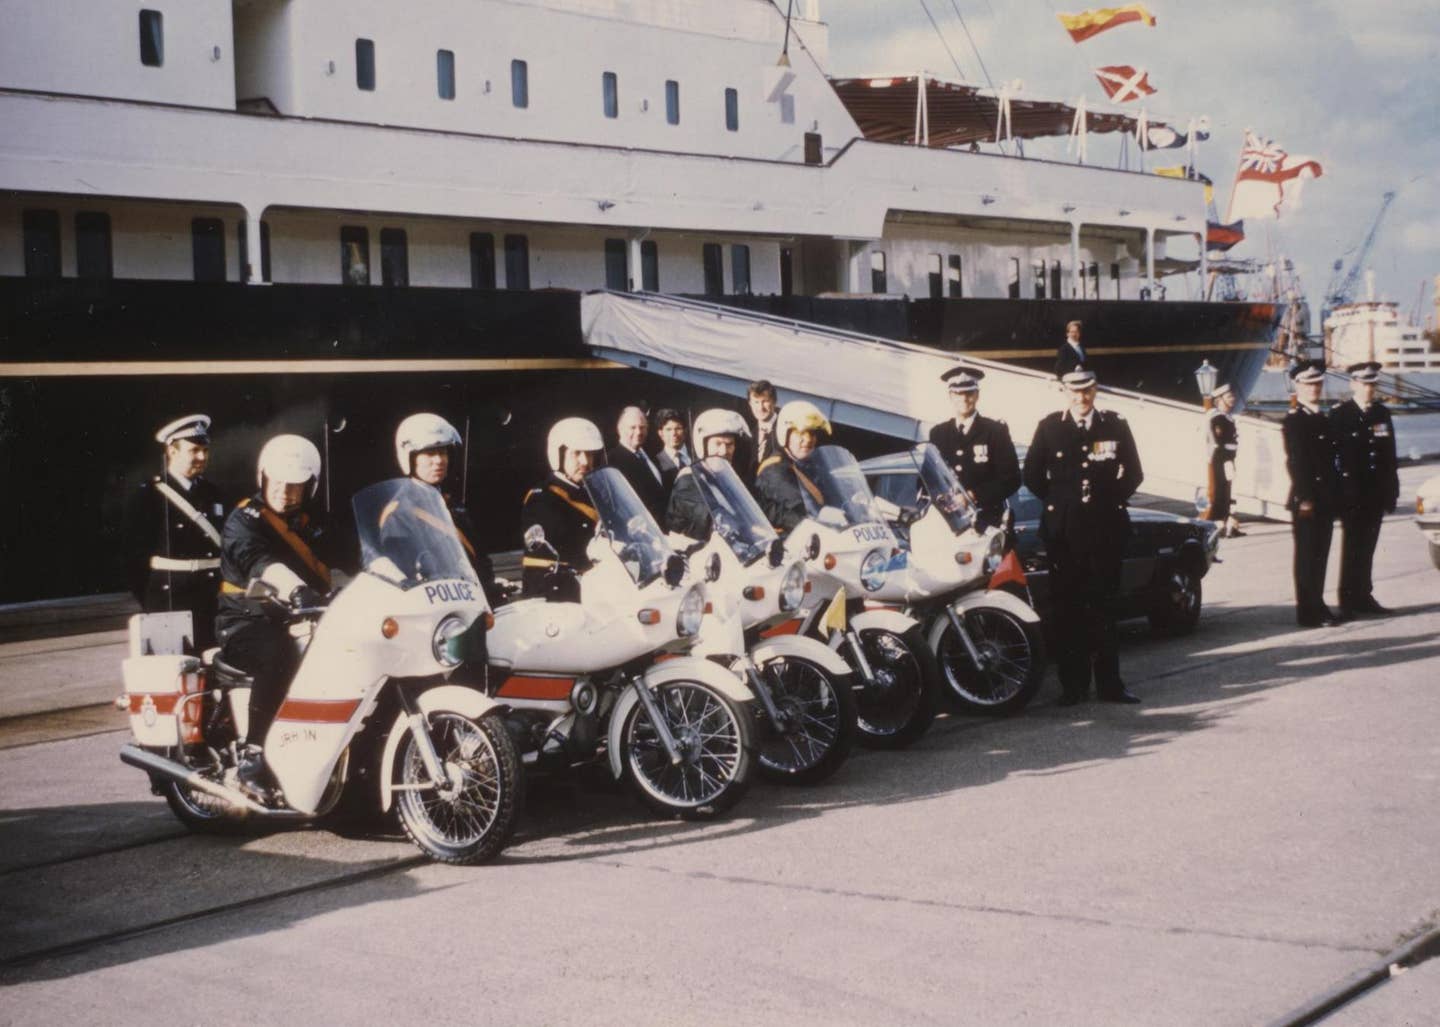 message-editor%2F1622584541197-police_officers_on_motorbikes_in_front_of_royal_yacht_britannia_for_her_majesty_the_queens_visit_to_humberside_1977_archive_ref_cchu-4-1-9-2_26284940670.jpg